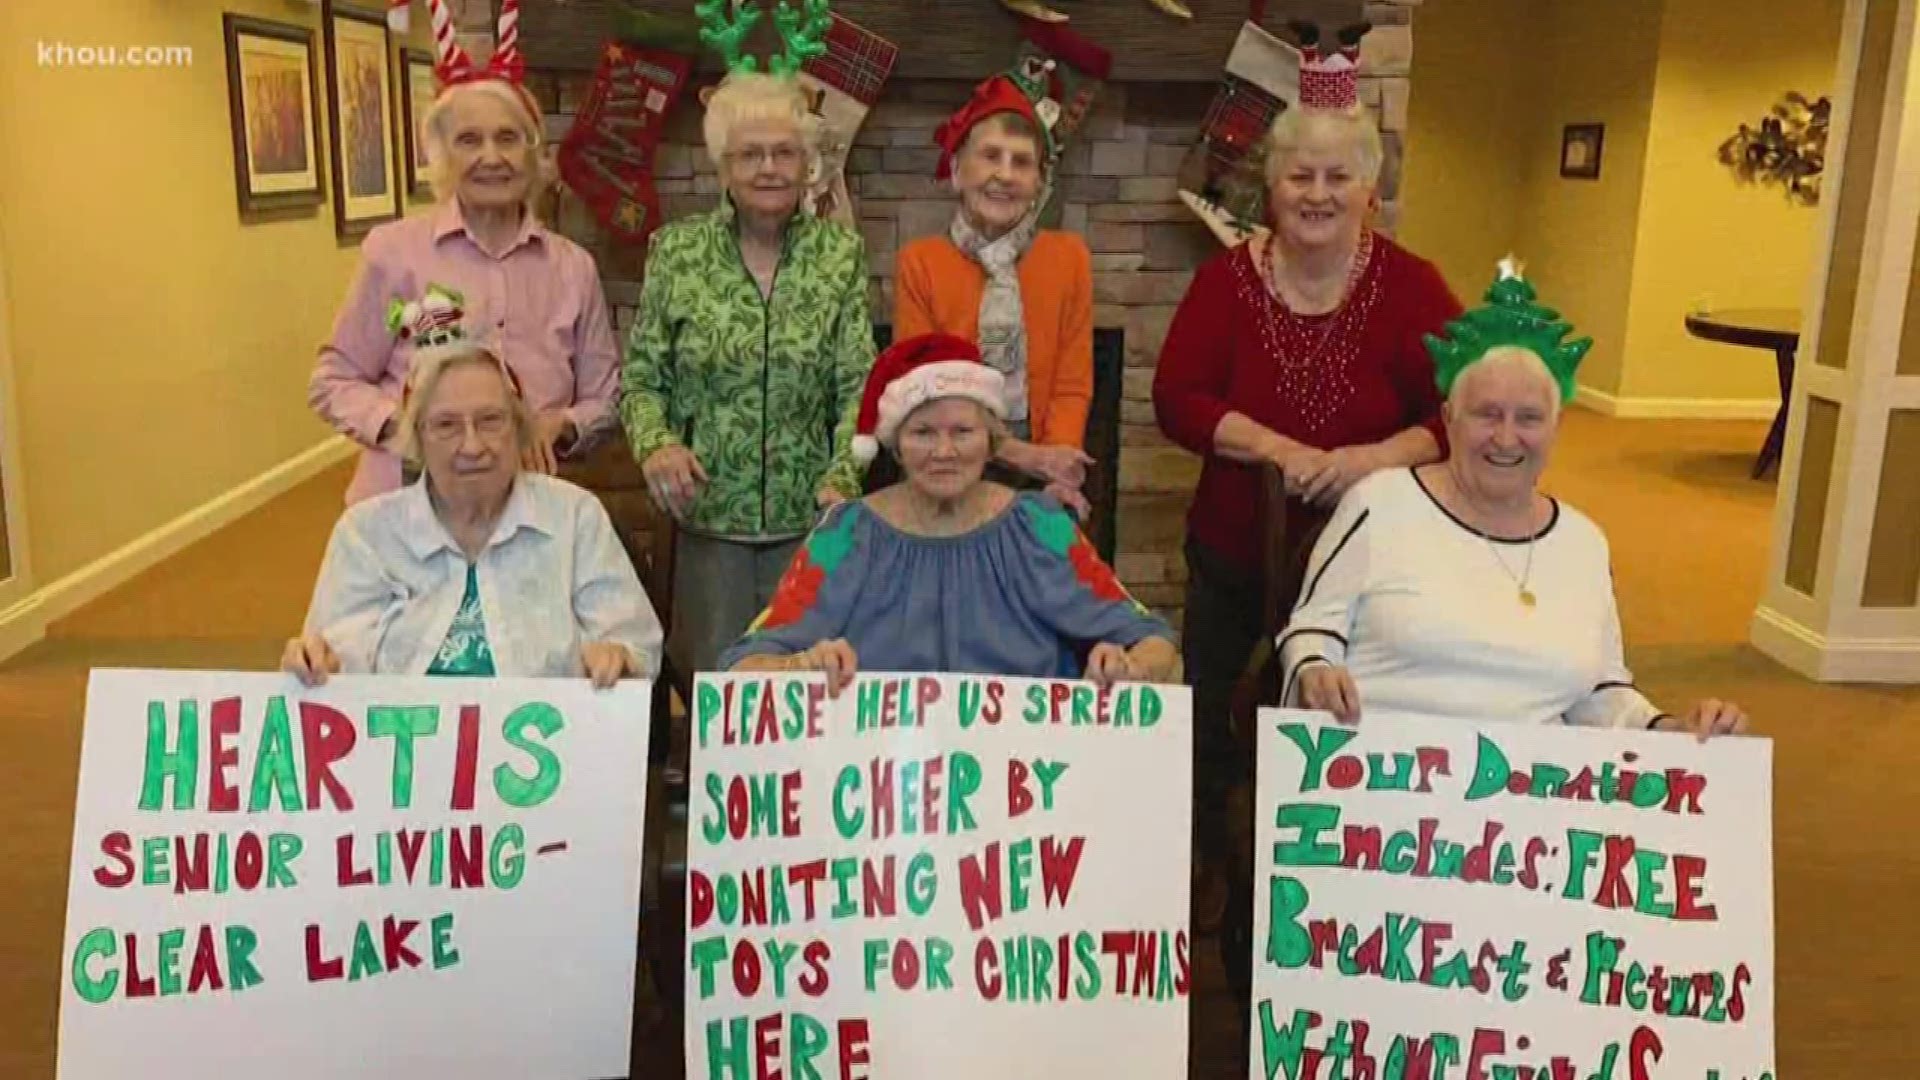 Heartis Senior Living Clear Lake launched a toy drive for children stuck in Shriners Hospital this Christmas.